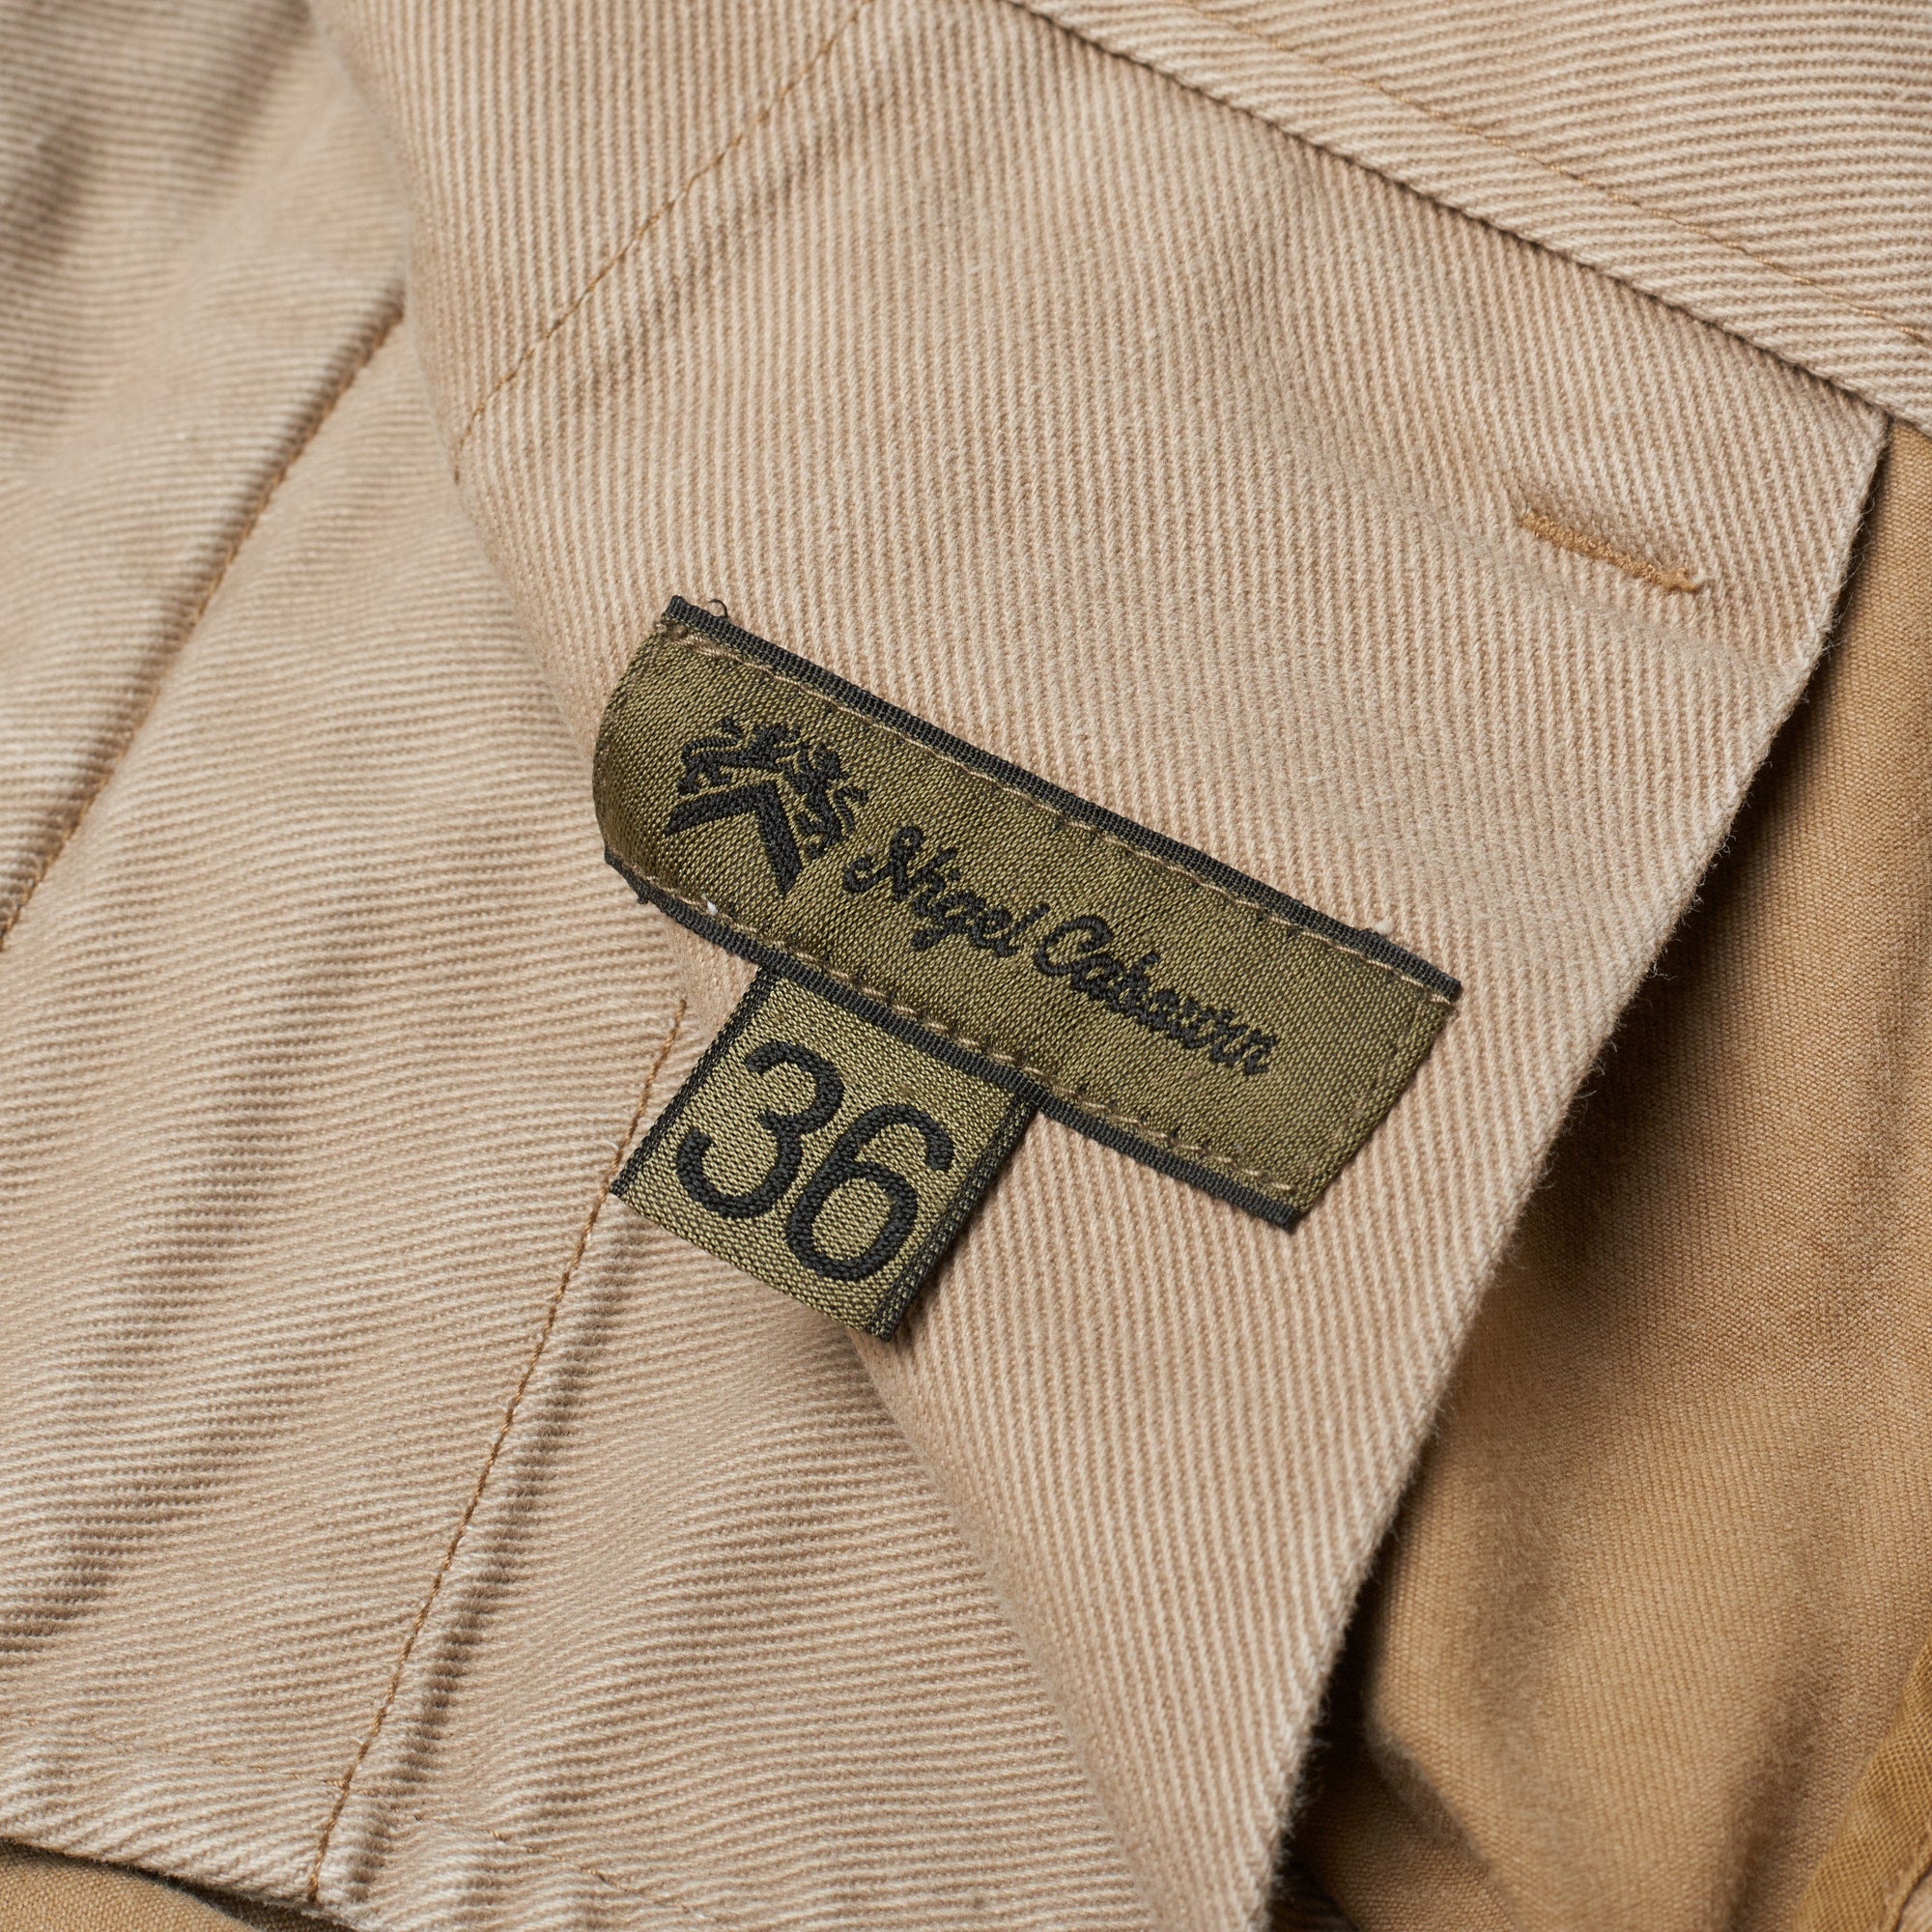 NIGEL CABOURN Tan Cotton Officer's Chino Pants US 33 34 Slim Fit